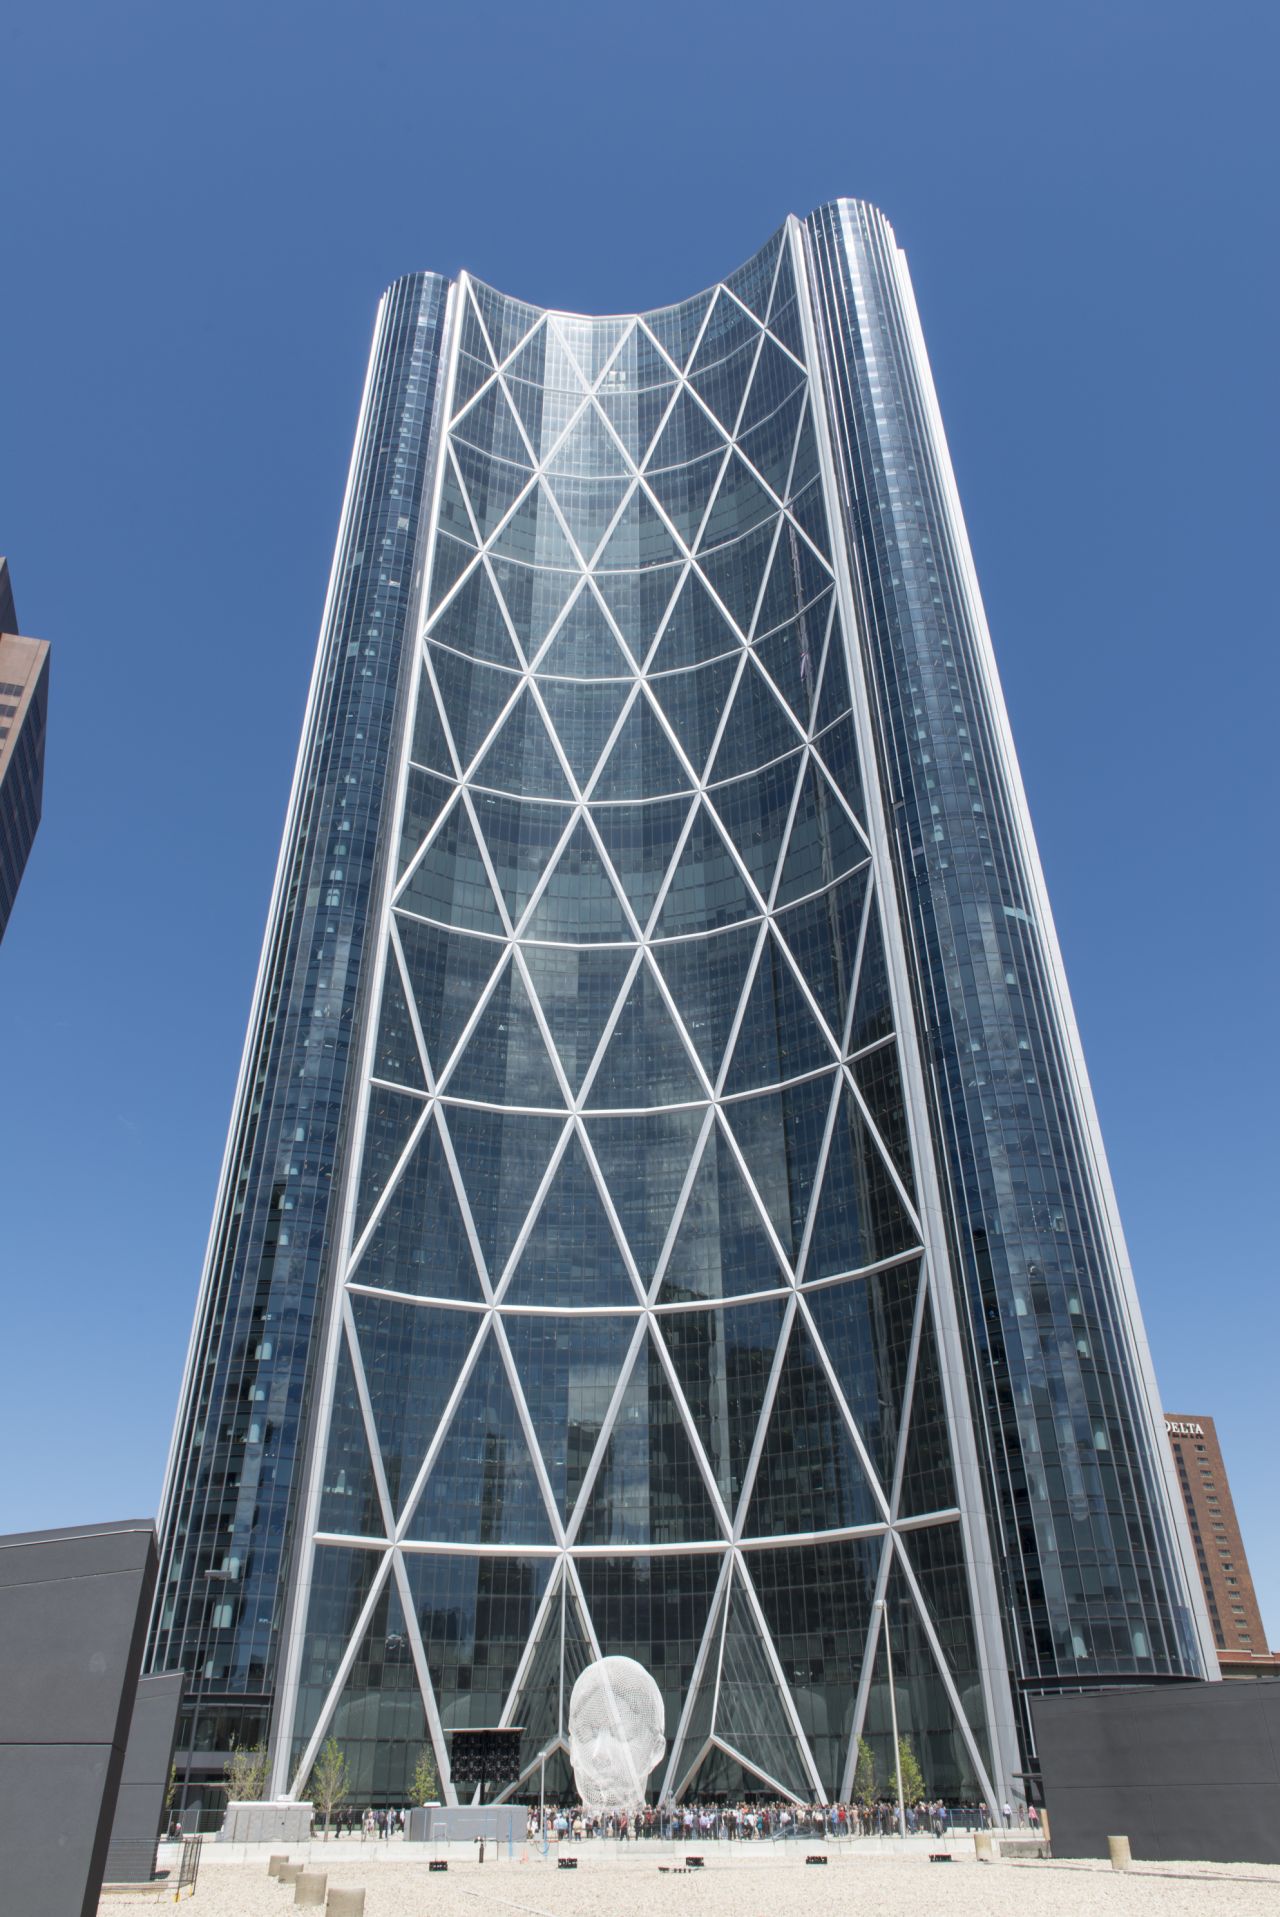 The skyscraper takes the name The Bow from the Bow River that runs nearby. At 236 meters it's the tallest building in Calgary and the third-tallest in Canada. Innovative use of steel and glass makes the building 30% lighter than other buildings of its size.<strong>Architects</strong>: Foster + Partners, Zeidler Partnership Architects